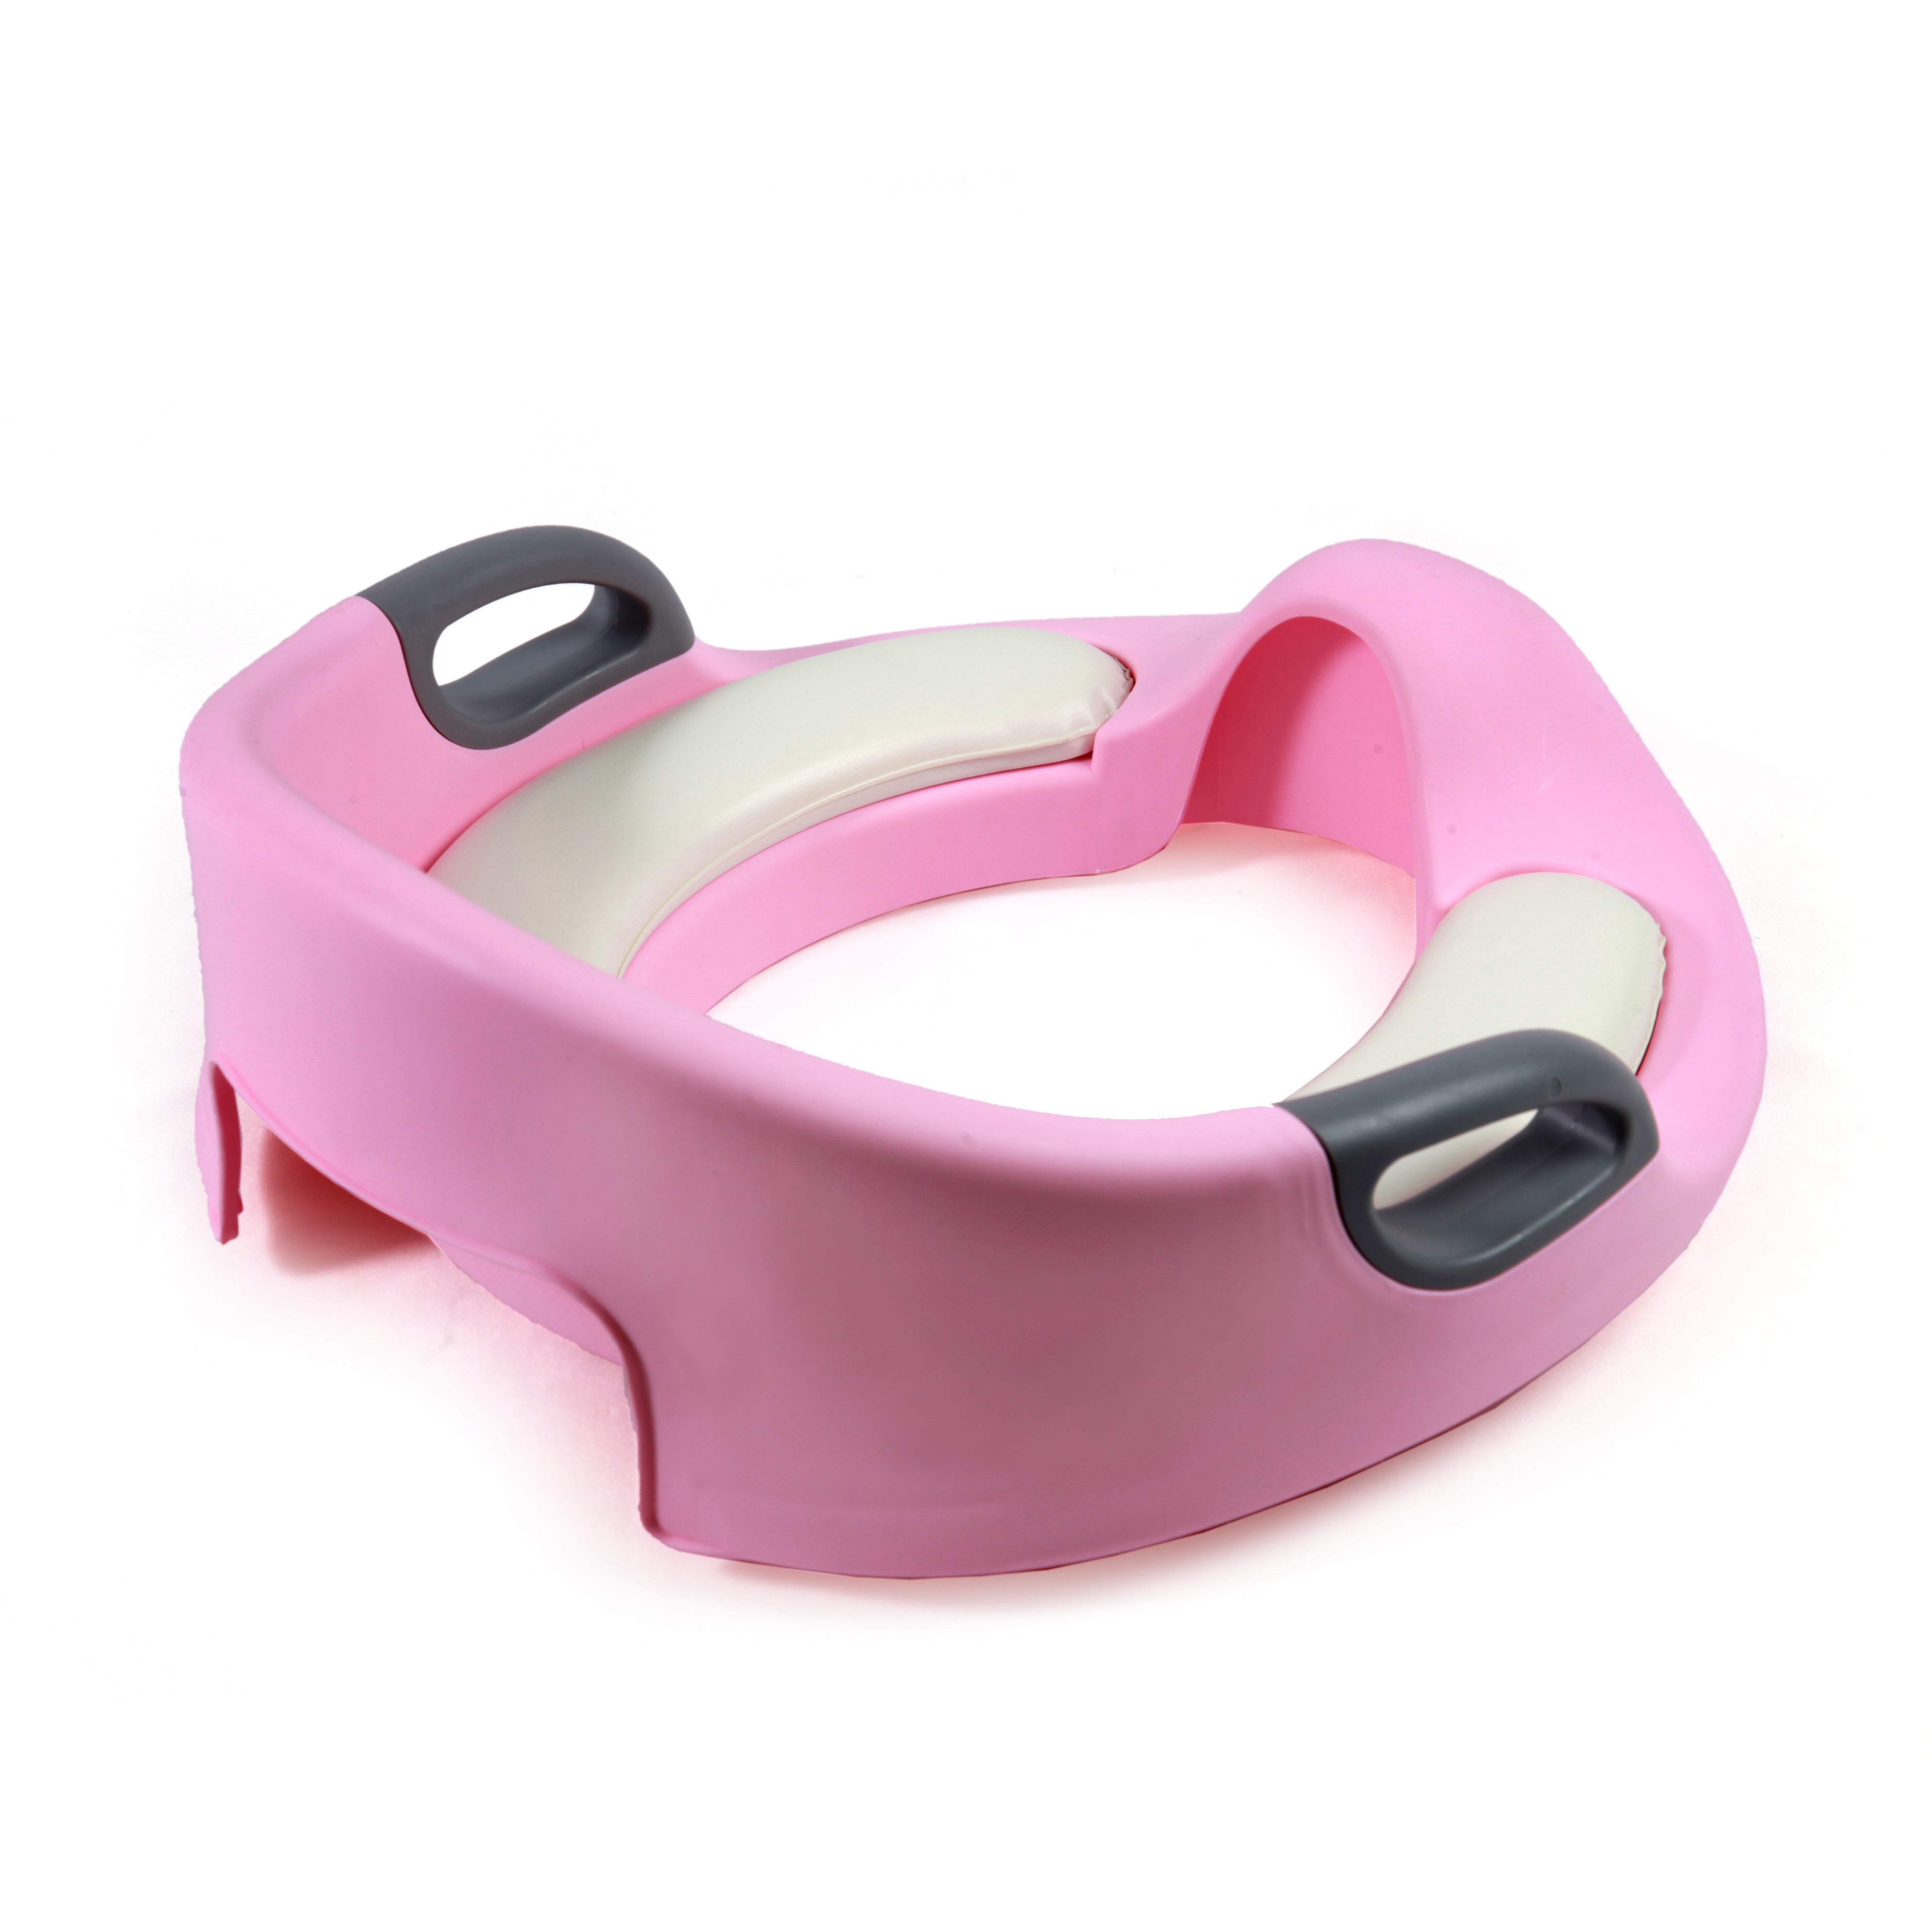 I Got Your Back Pink Cushioned Potty Seat - Baby Moo